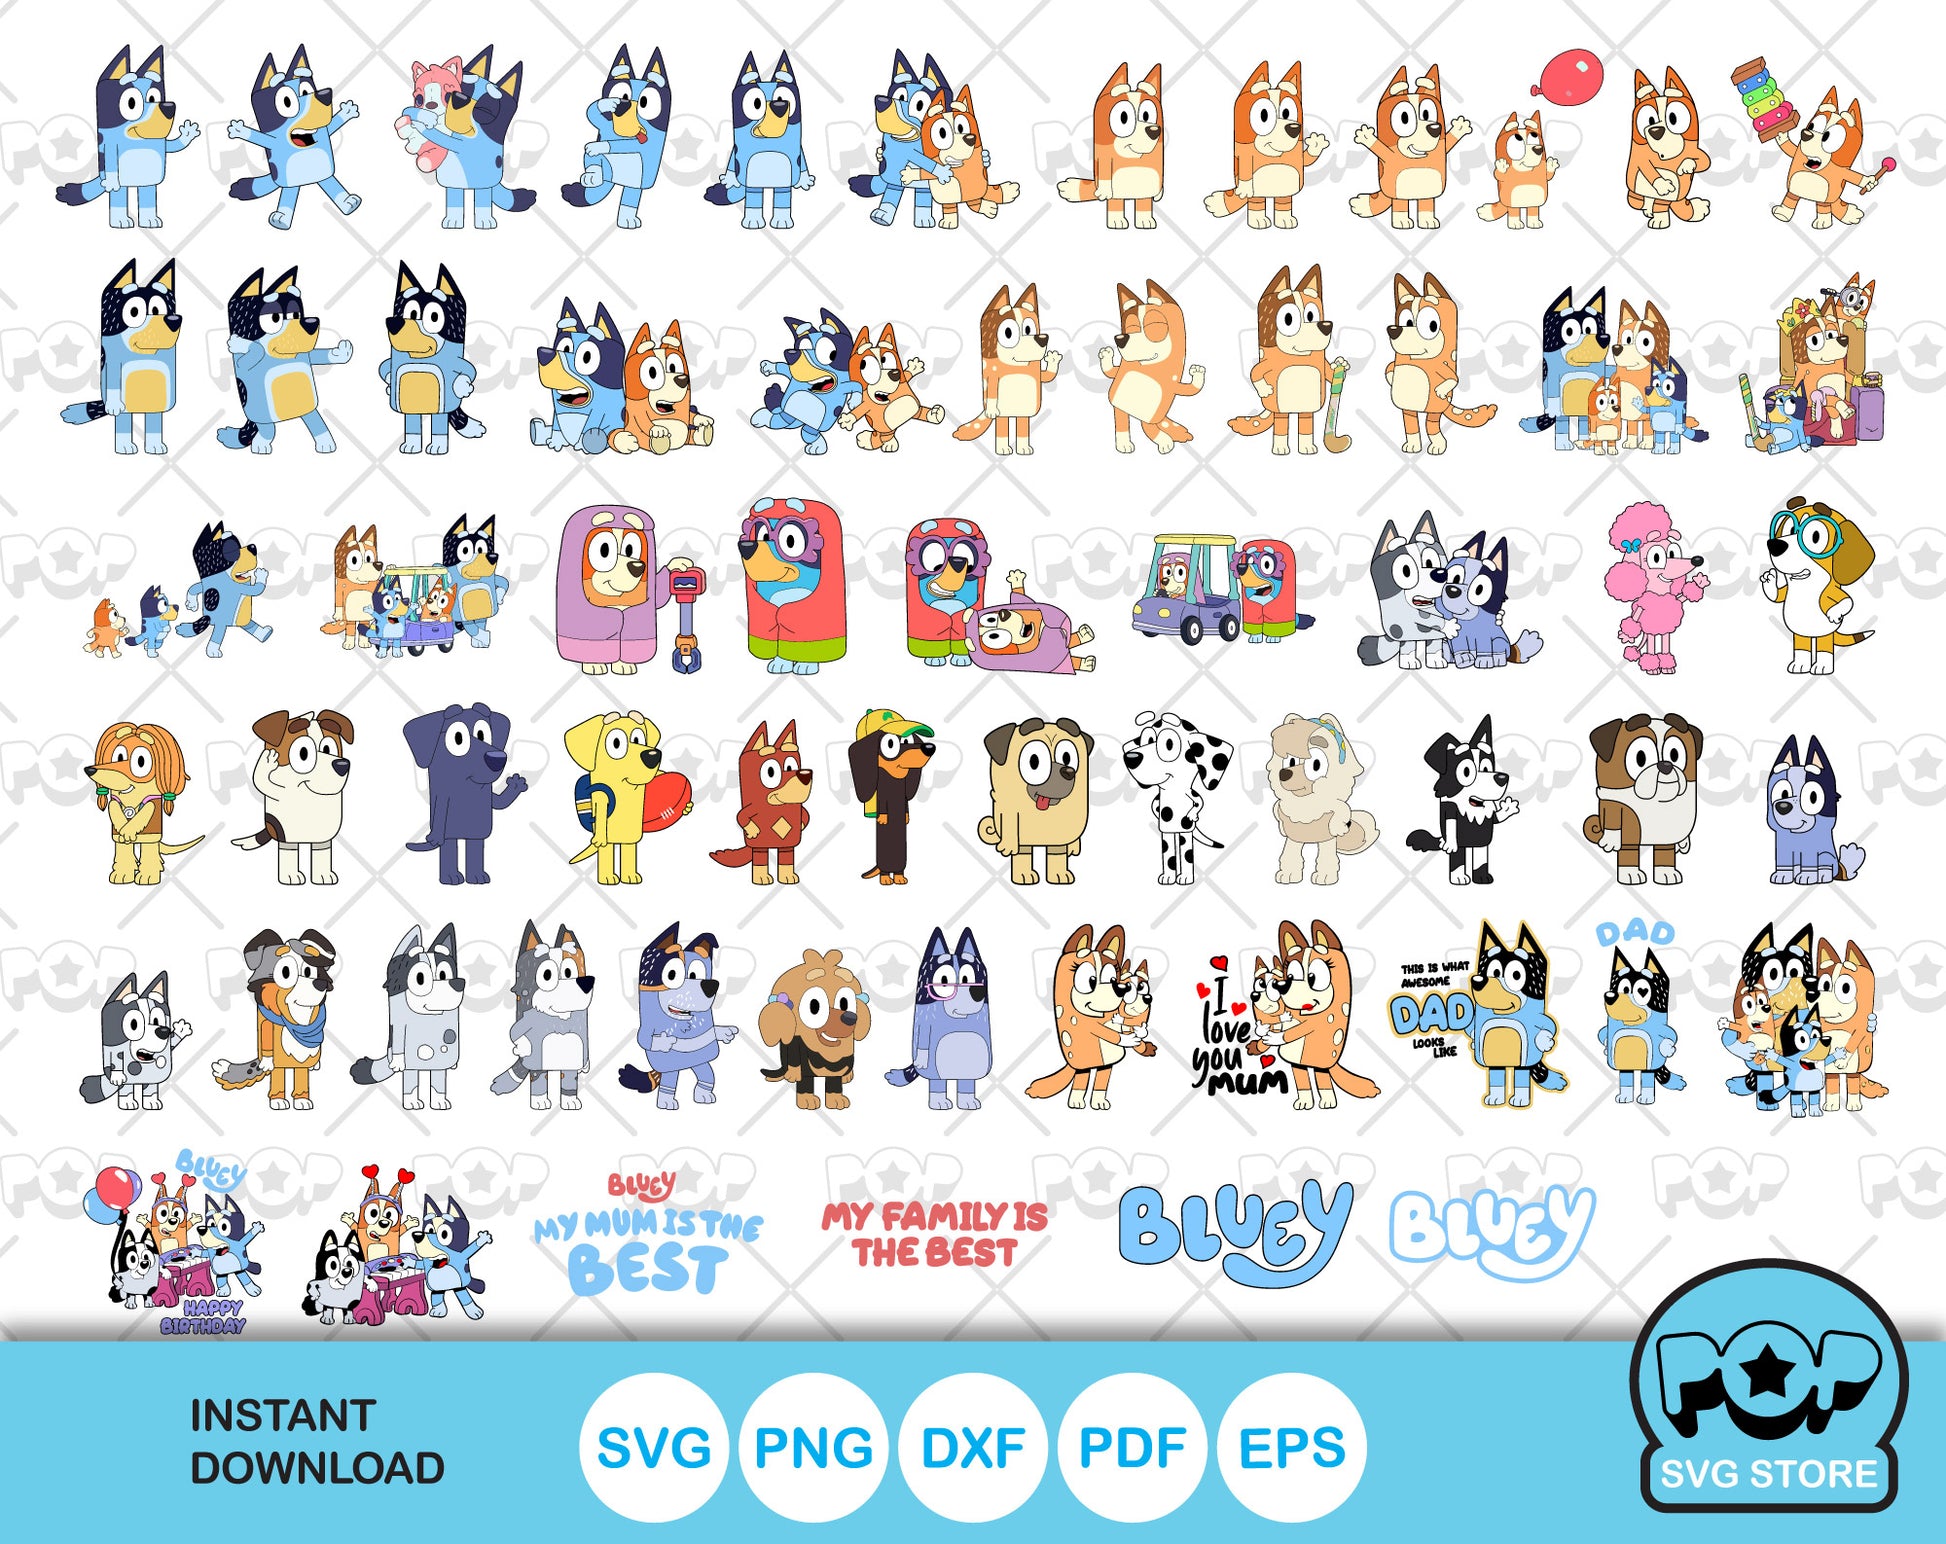 Bluey Family Iron On Design Cut Files - Instant Download Digital